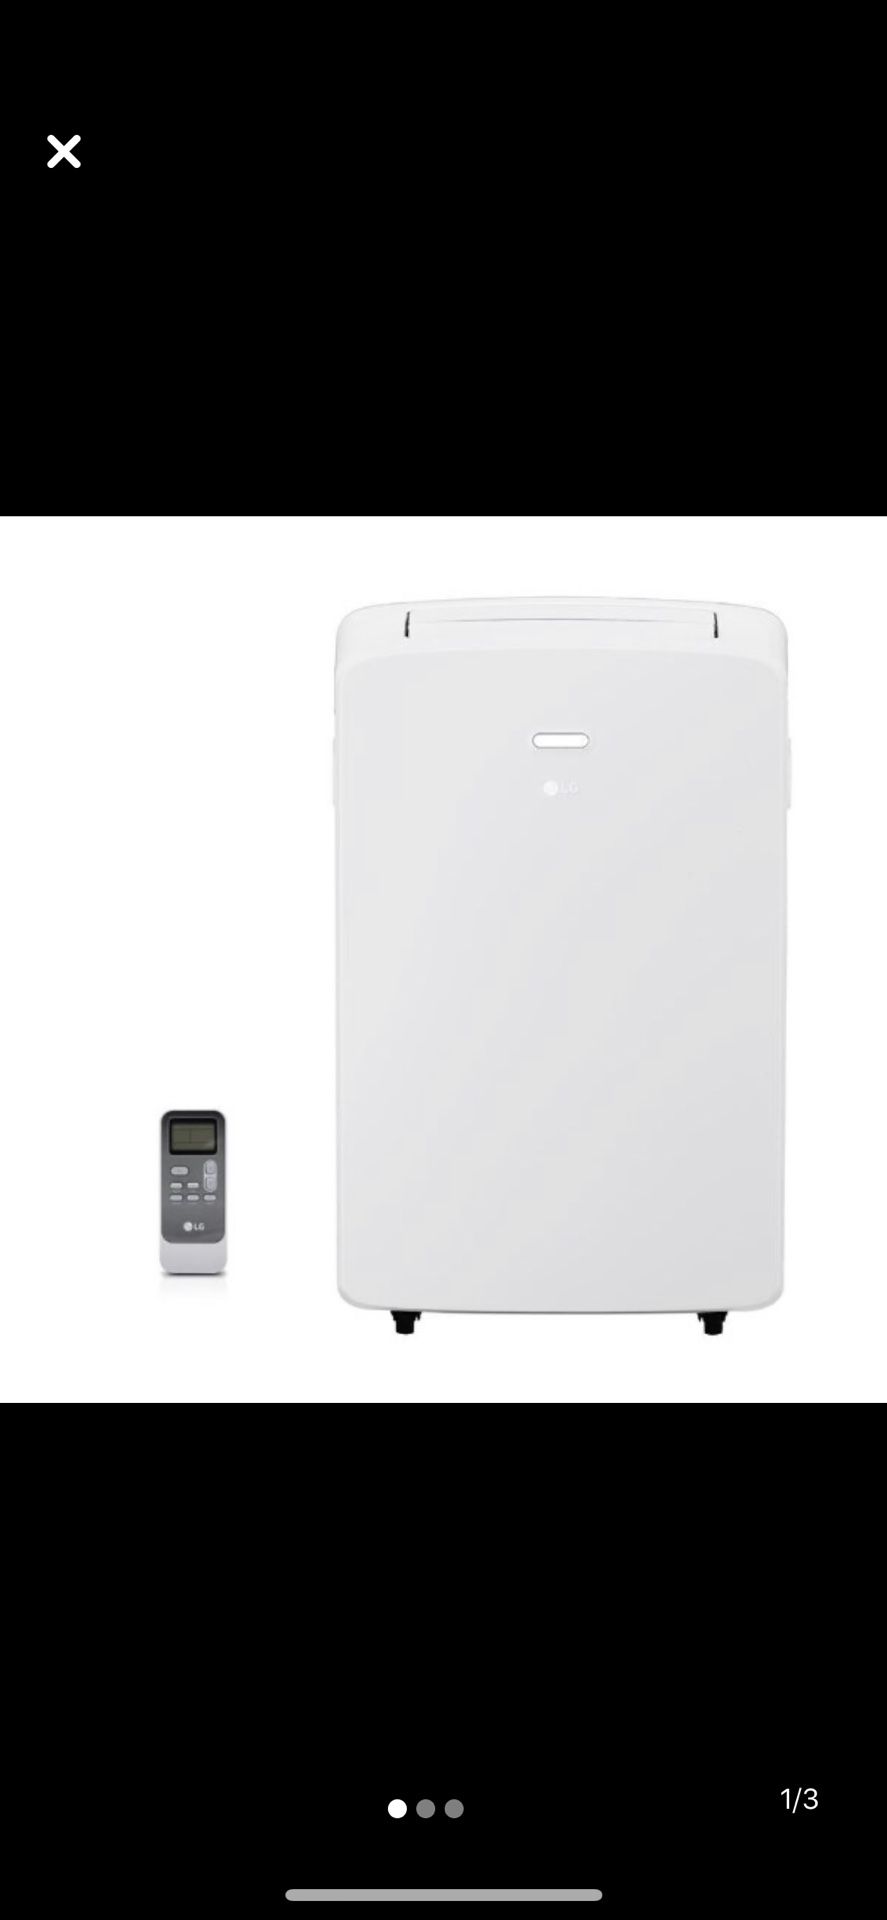 LG portable air conditioner with dehumidifier